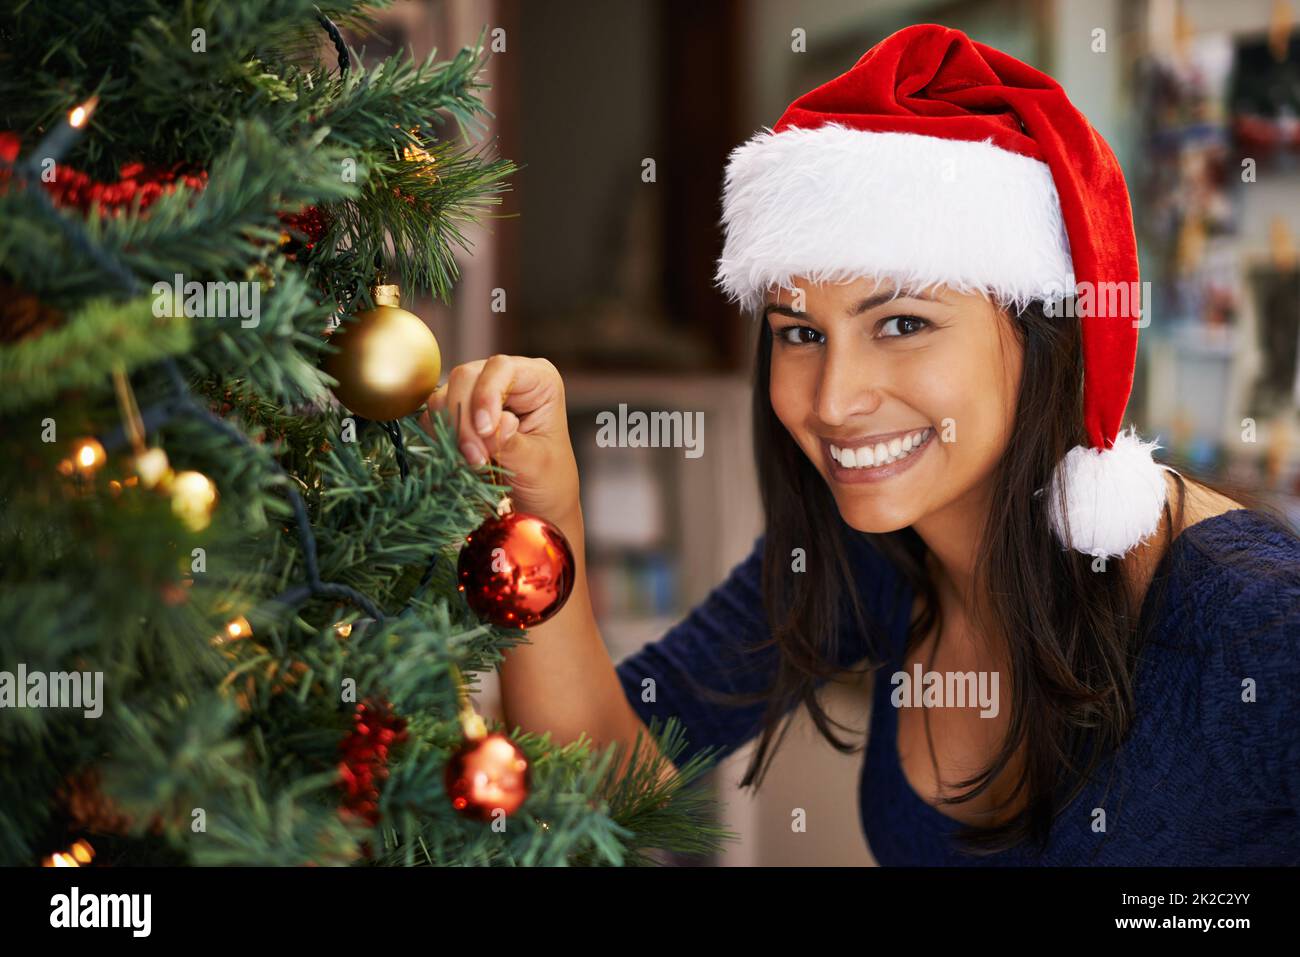 Shes a pro at Christmas tree decoration. Portrait of a beautiful young woman decorating a Christmas tree. Stock Photo